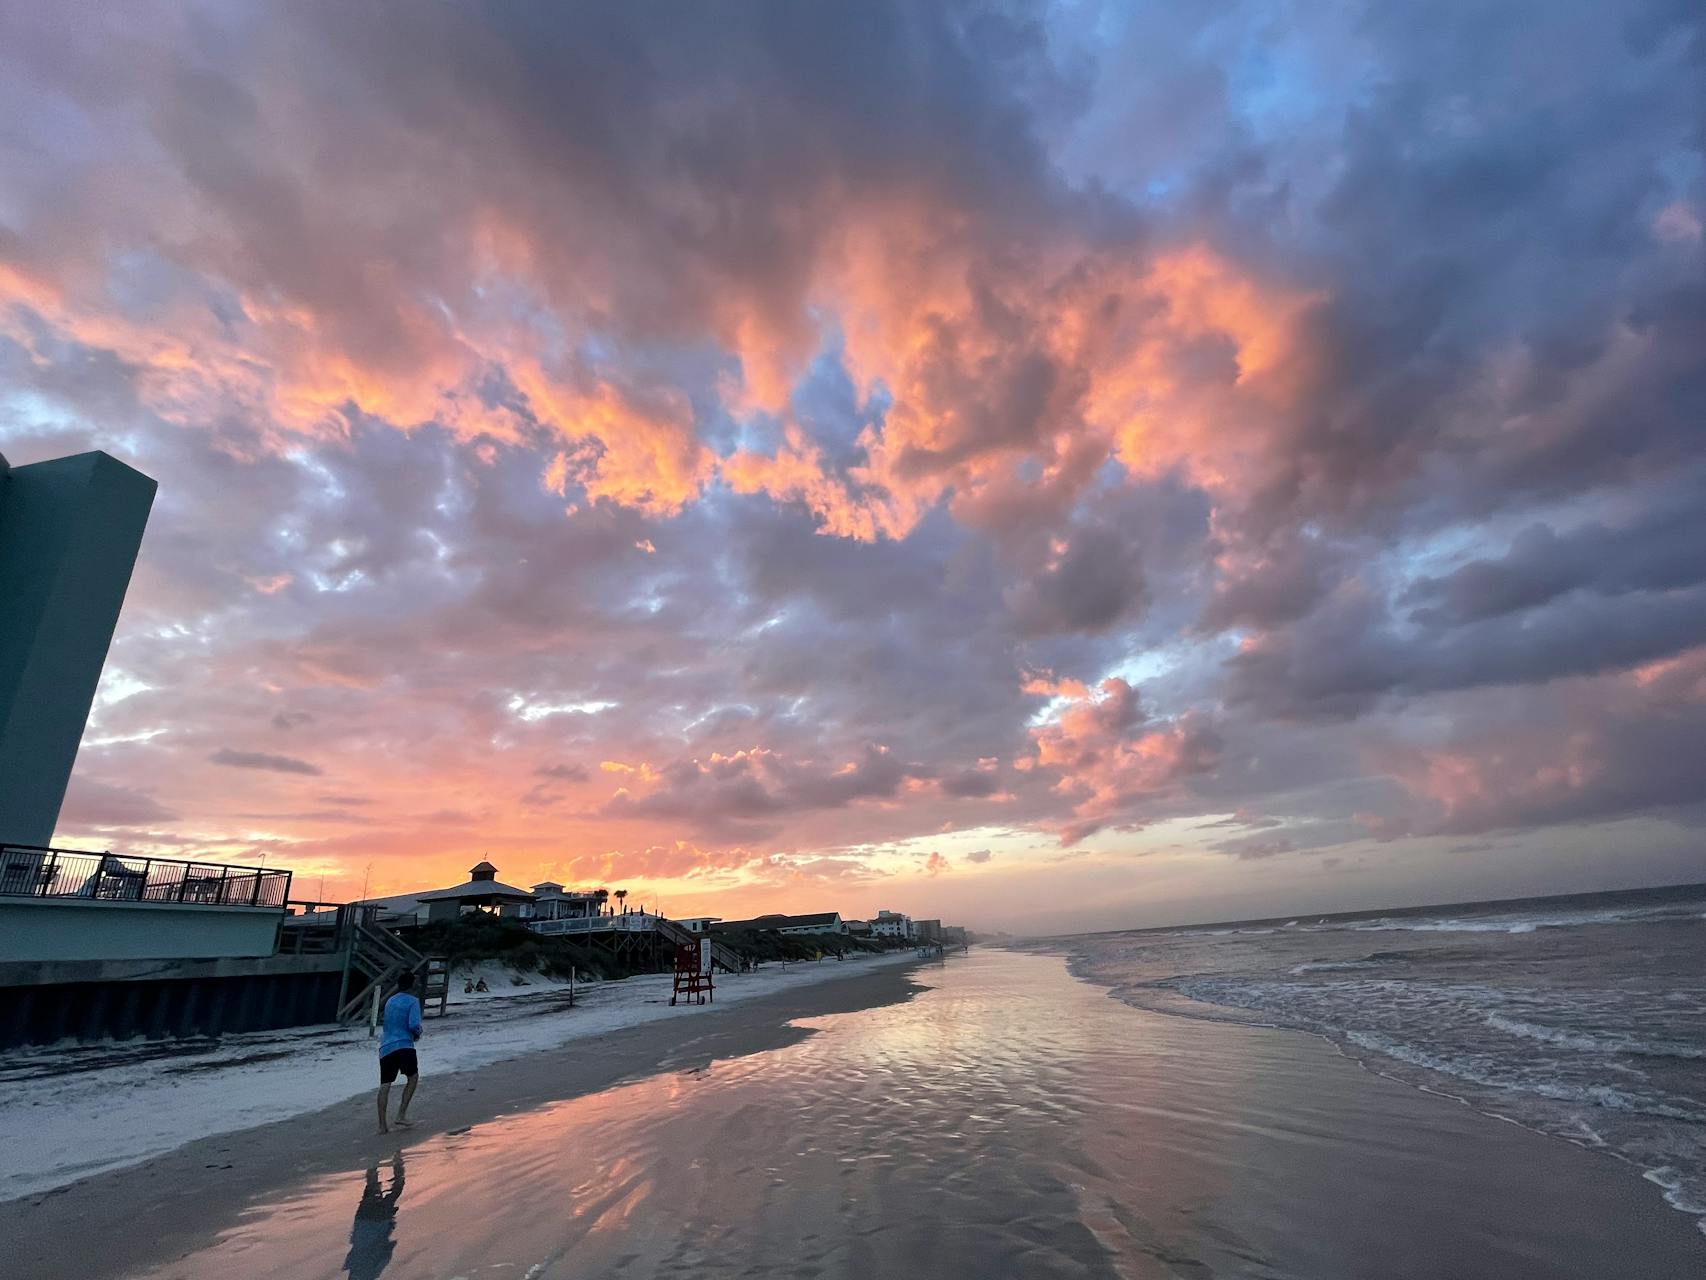 New Smyrna Beach has miles of wide, hard-packed sand for strolling.